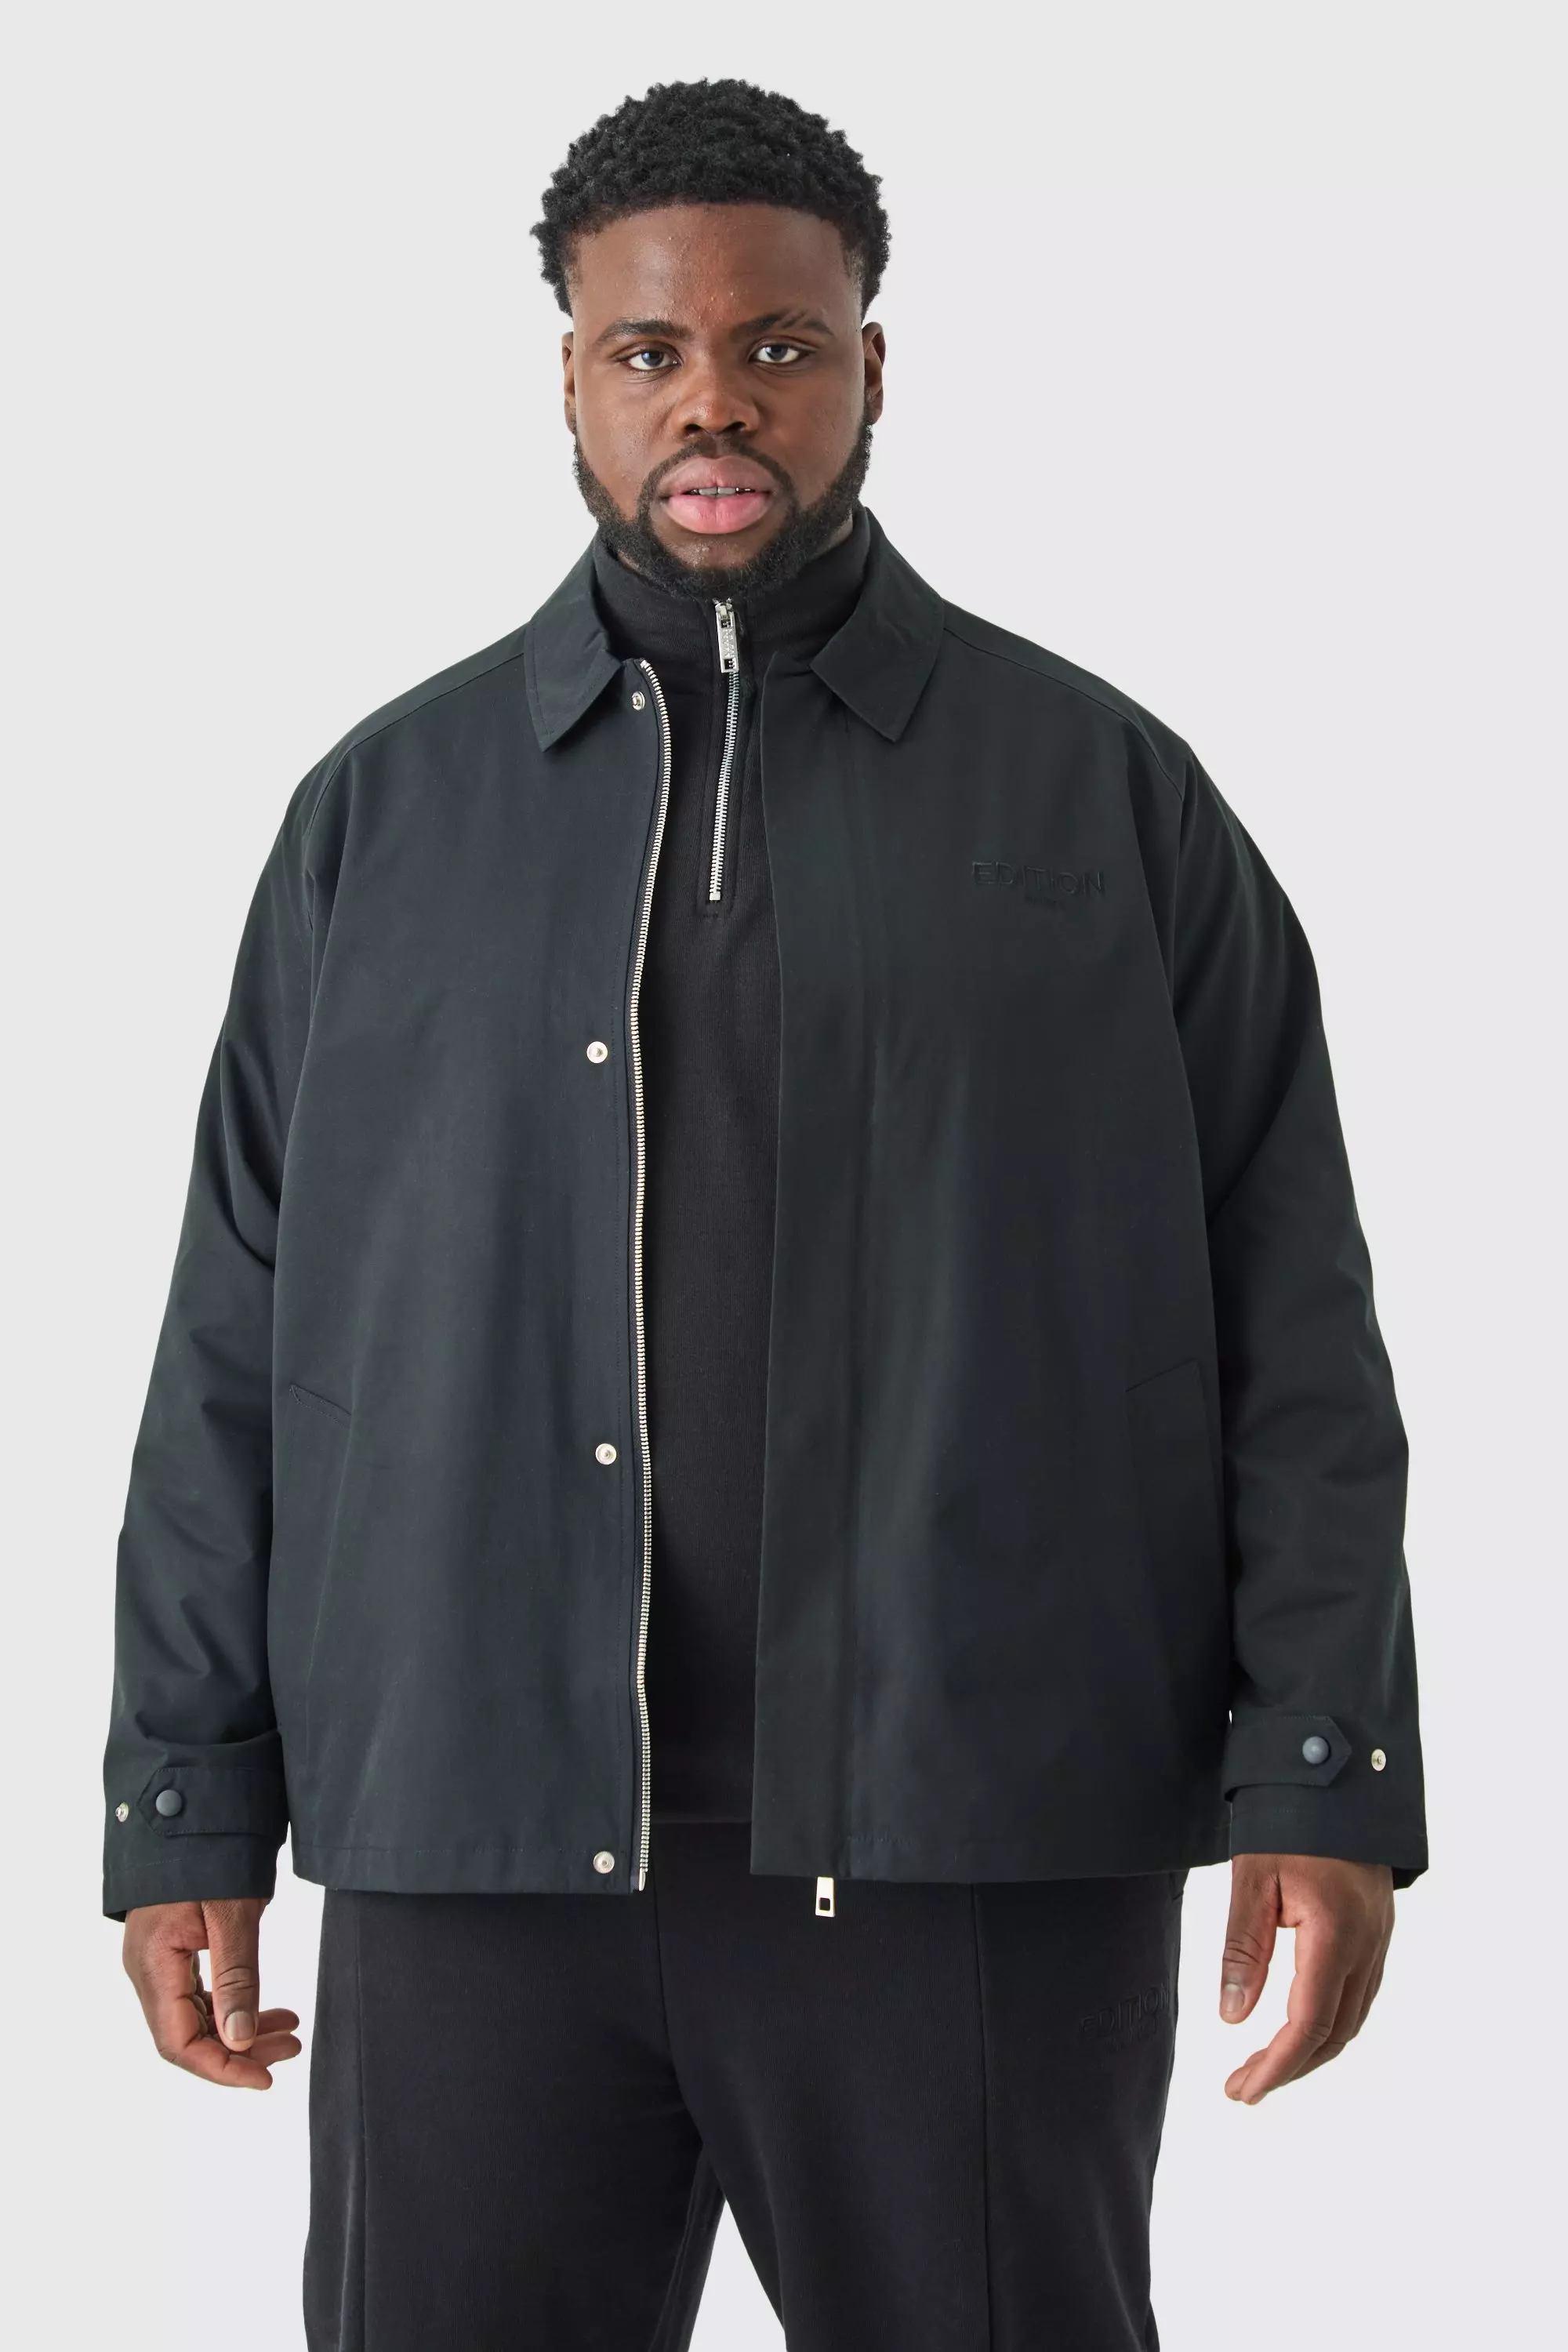 Black Heavyweight Twill Embroidered Coach Jacket